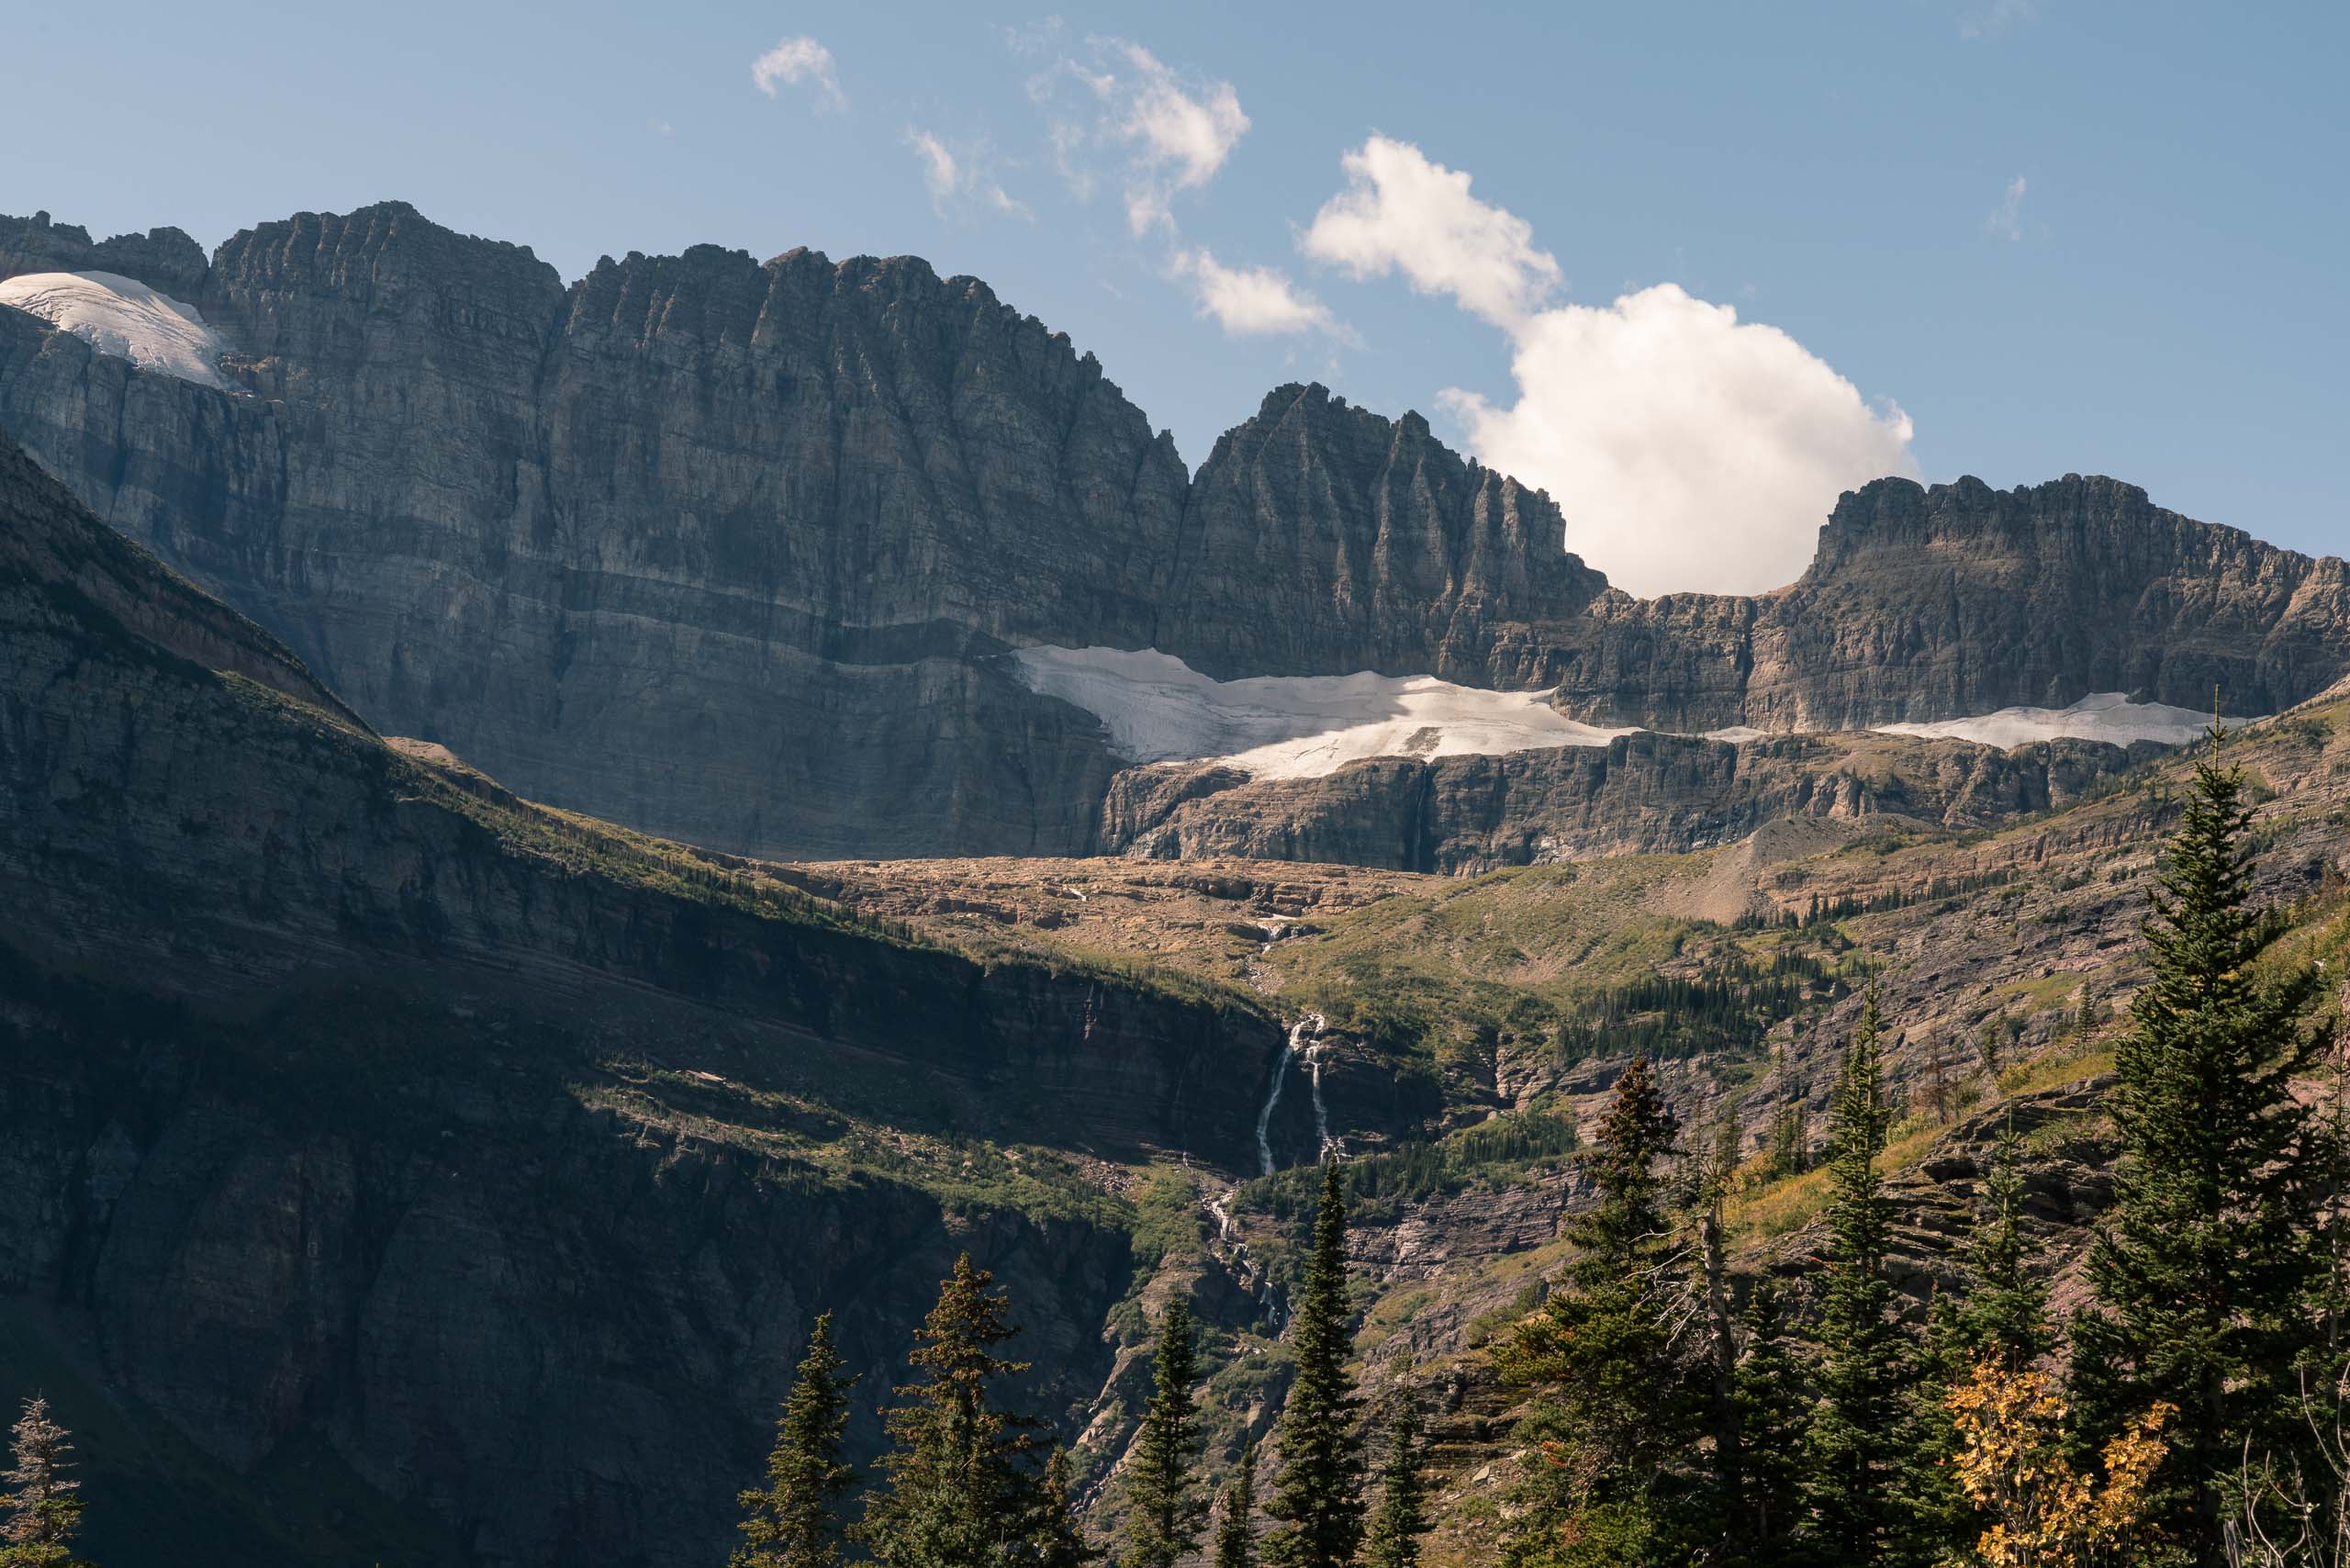 Travel and landscape photography of Glacier National Park, Montana, USA made by New York photographer Mary Catherine Messner (mcmessner).